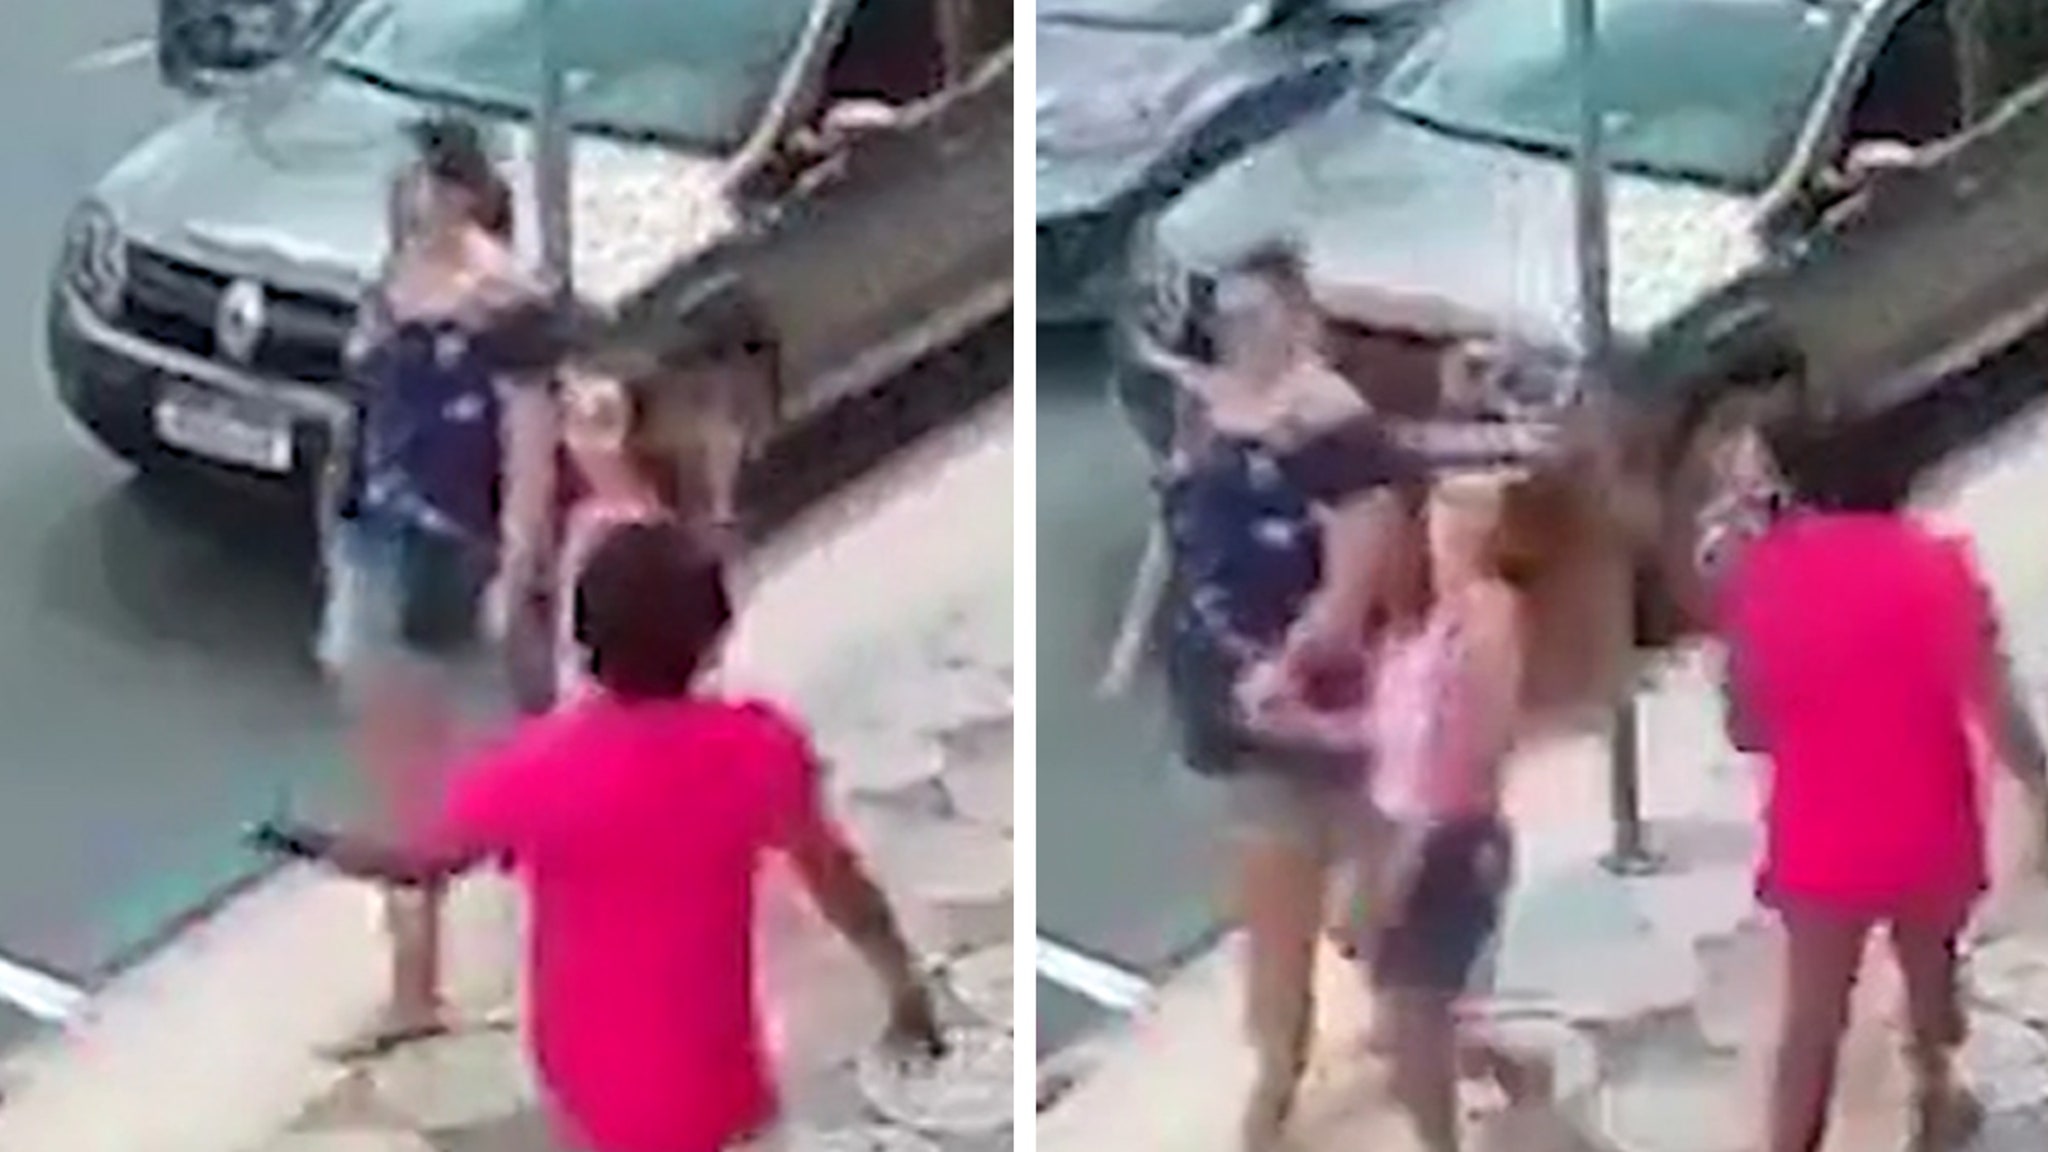 Young Girl Gets Slapped in the Face by Random Woman in Brazil, Video